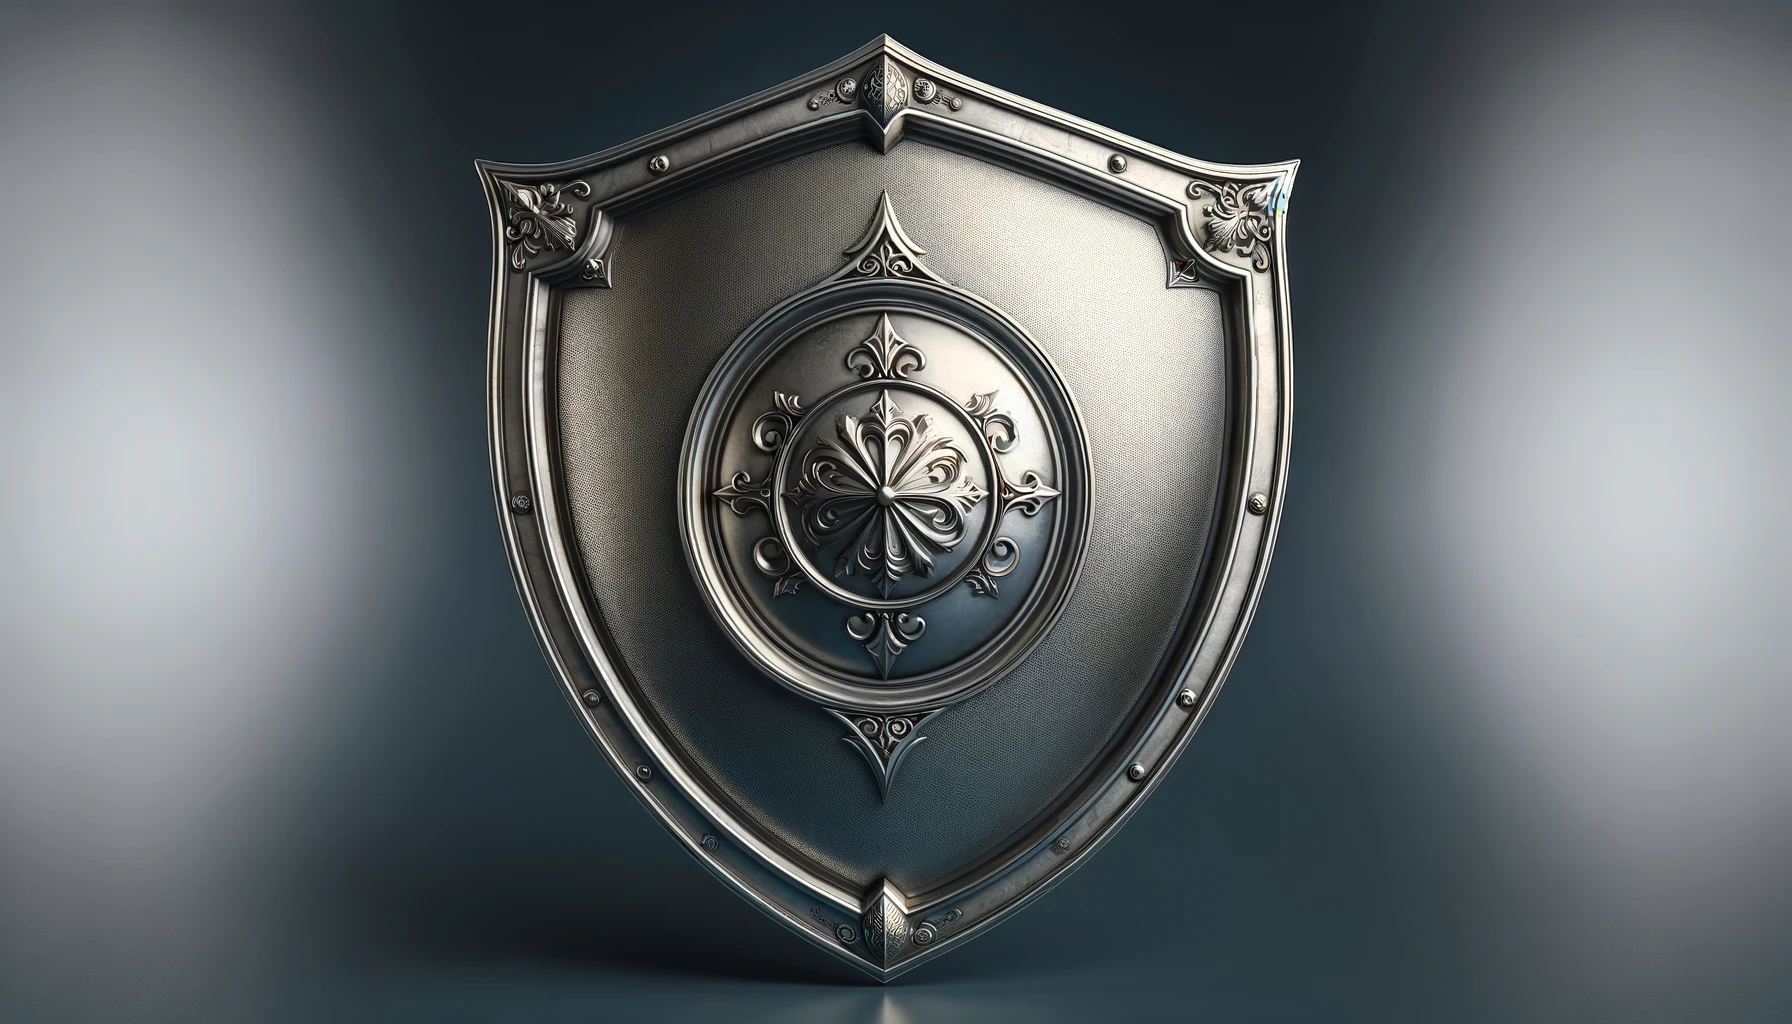 The image features a classic shield design with a polished metallic surface and a simple yet elegant emblem at the center, set against a minimalist background. The shades of silver and gray highlight the shield's robustness, evoking a sense of security, protection, and timeless resilience.